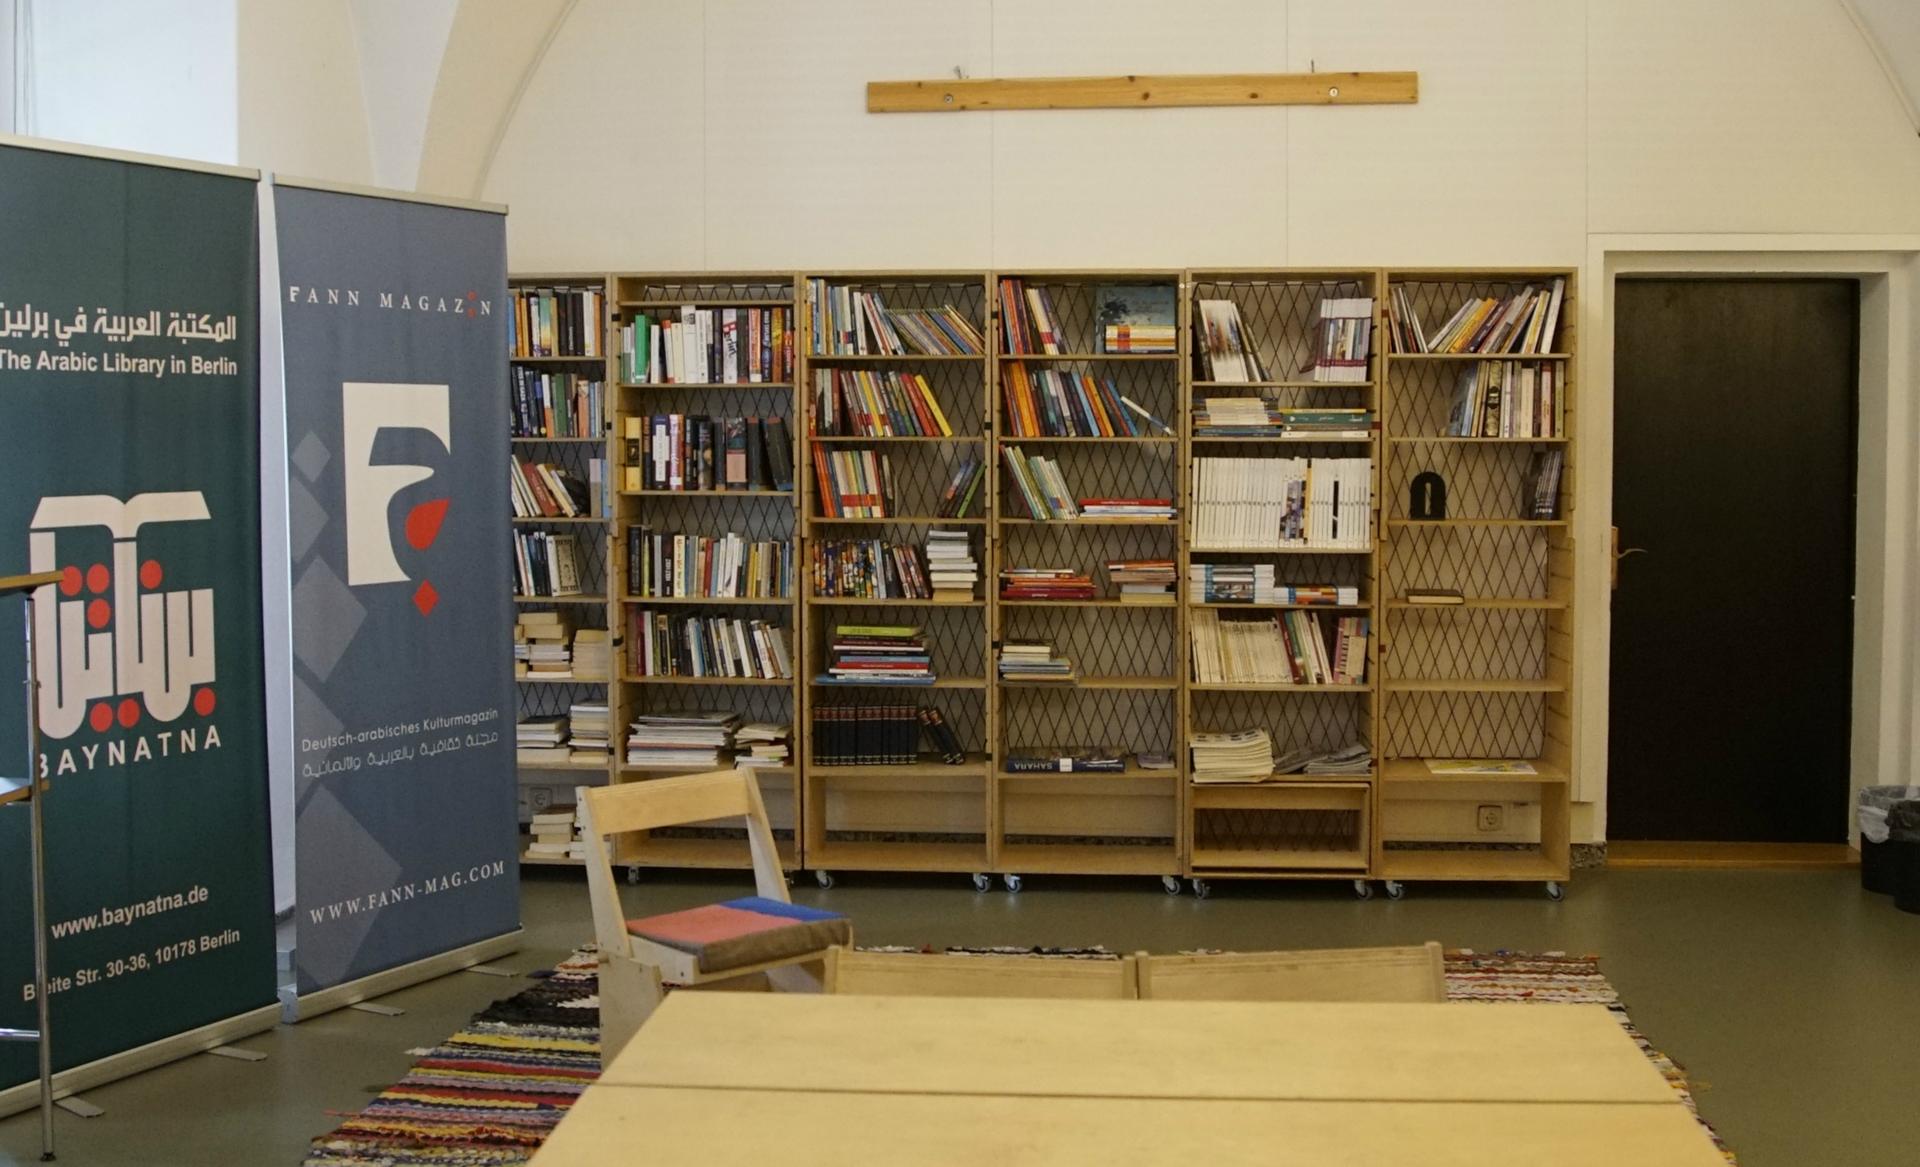 The library is built out of custom bookshelves and tables that are designed to be moved and stored easily, in case of a change in location. It's decorated with rugs woven from old clothing.